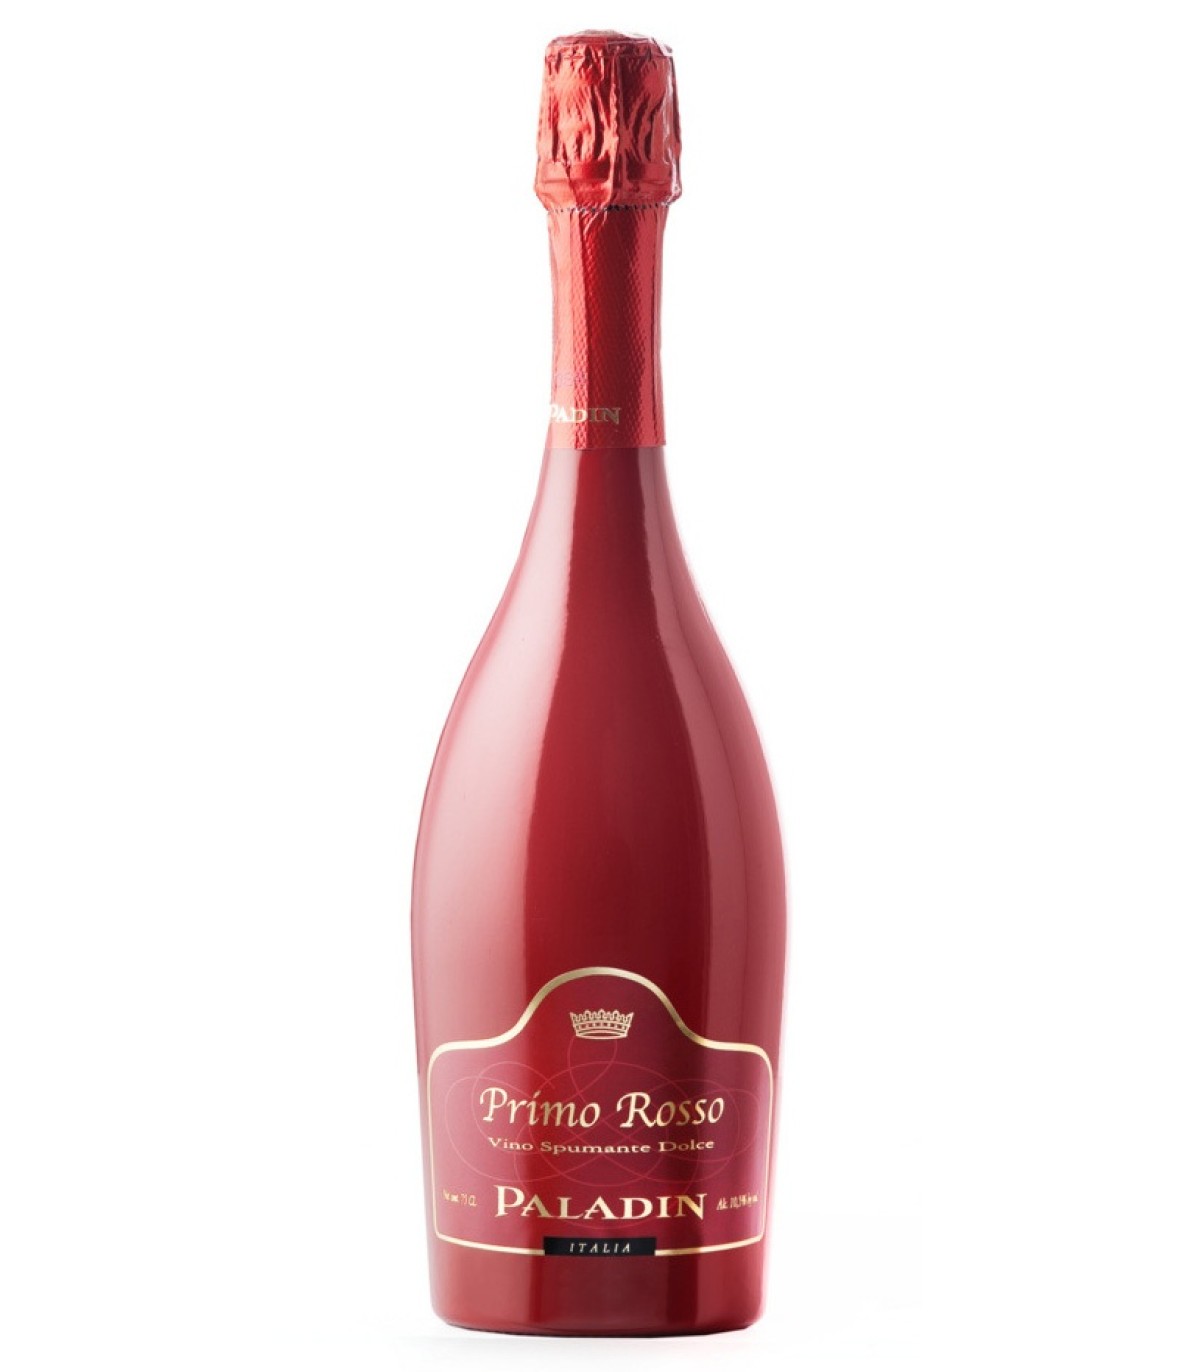 The first Red sparkling wine - Paladin